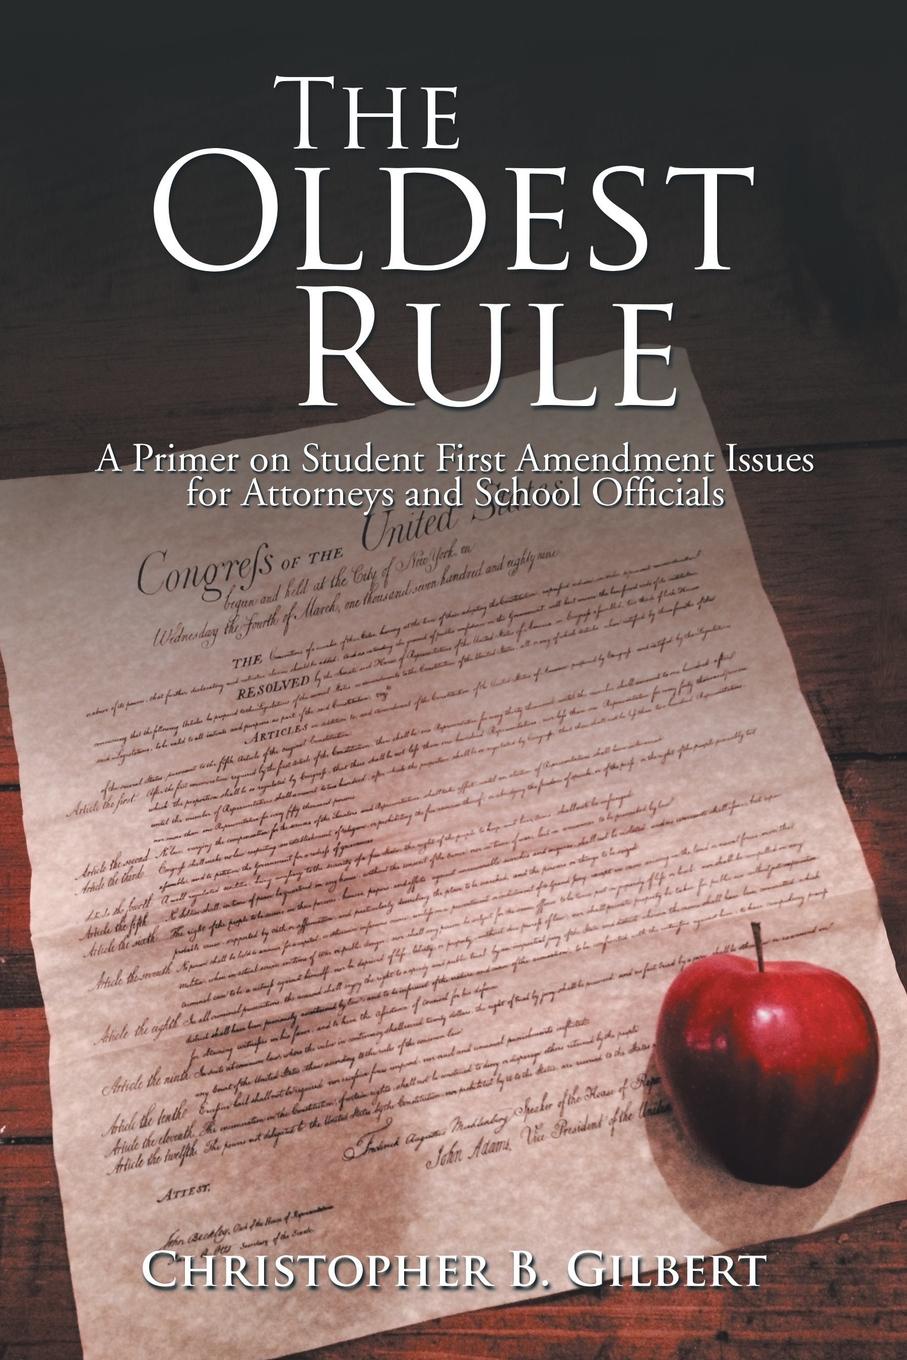 The Oldest Rule. A Primer on Student First Amendment Issues for Attorneys and School Officials